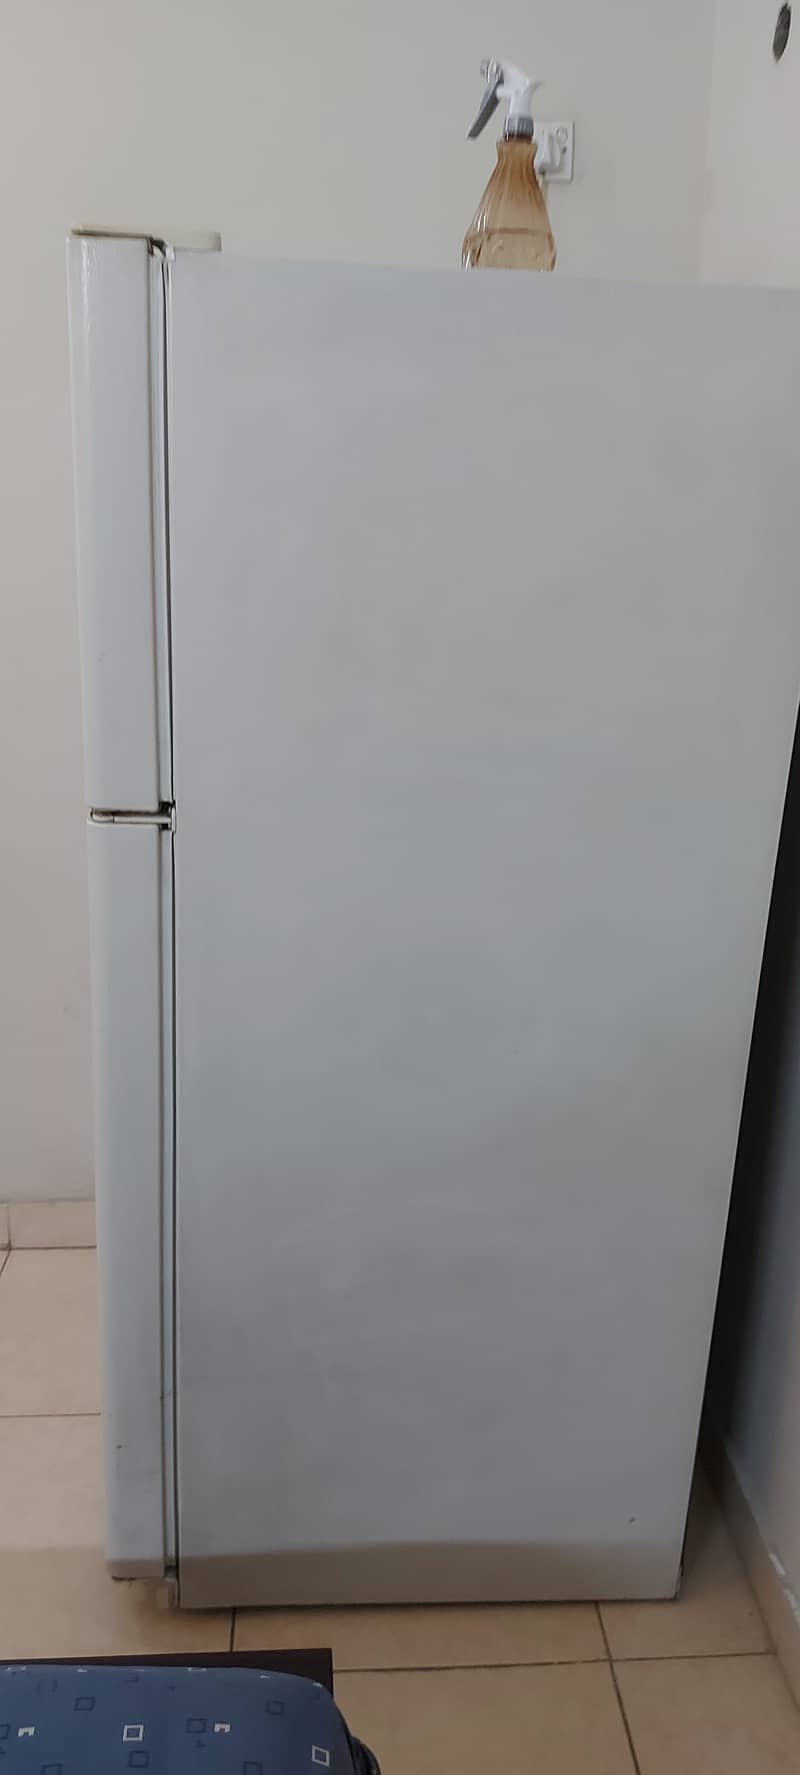 GE Refrigerator Made in Mexico Huge size 615 ltr capacity 22 cu ft 5